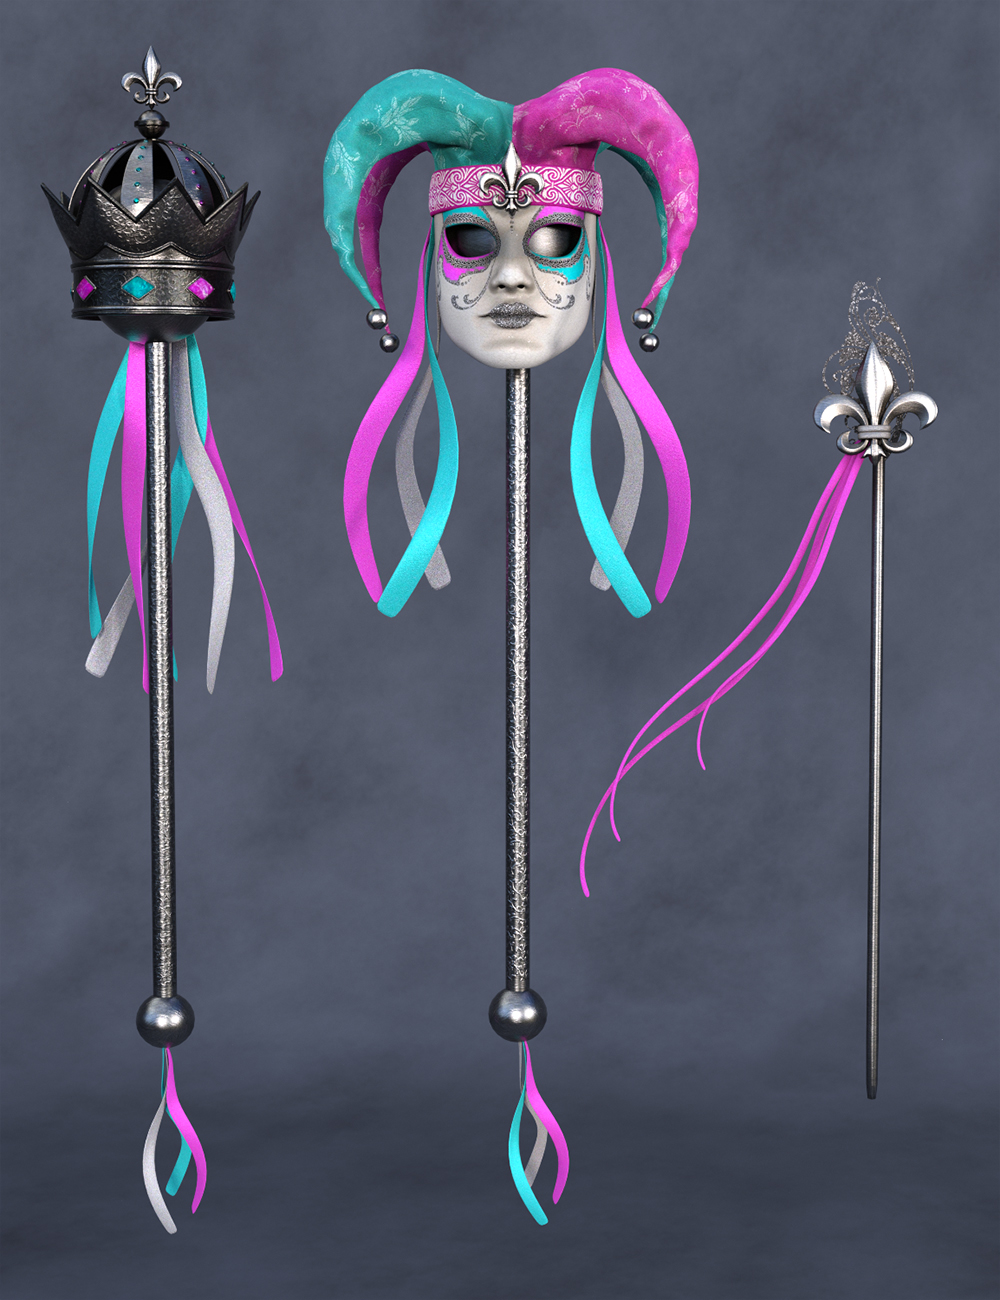 Fun Mardi Gras Mix and Match Scepters for Genesis 8 and 8.1